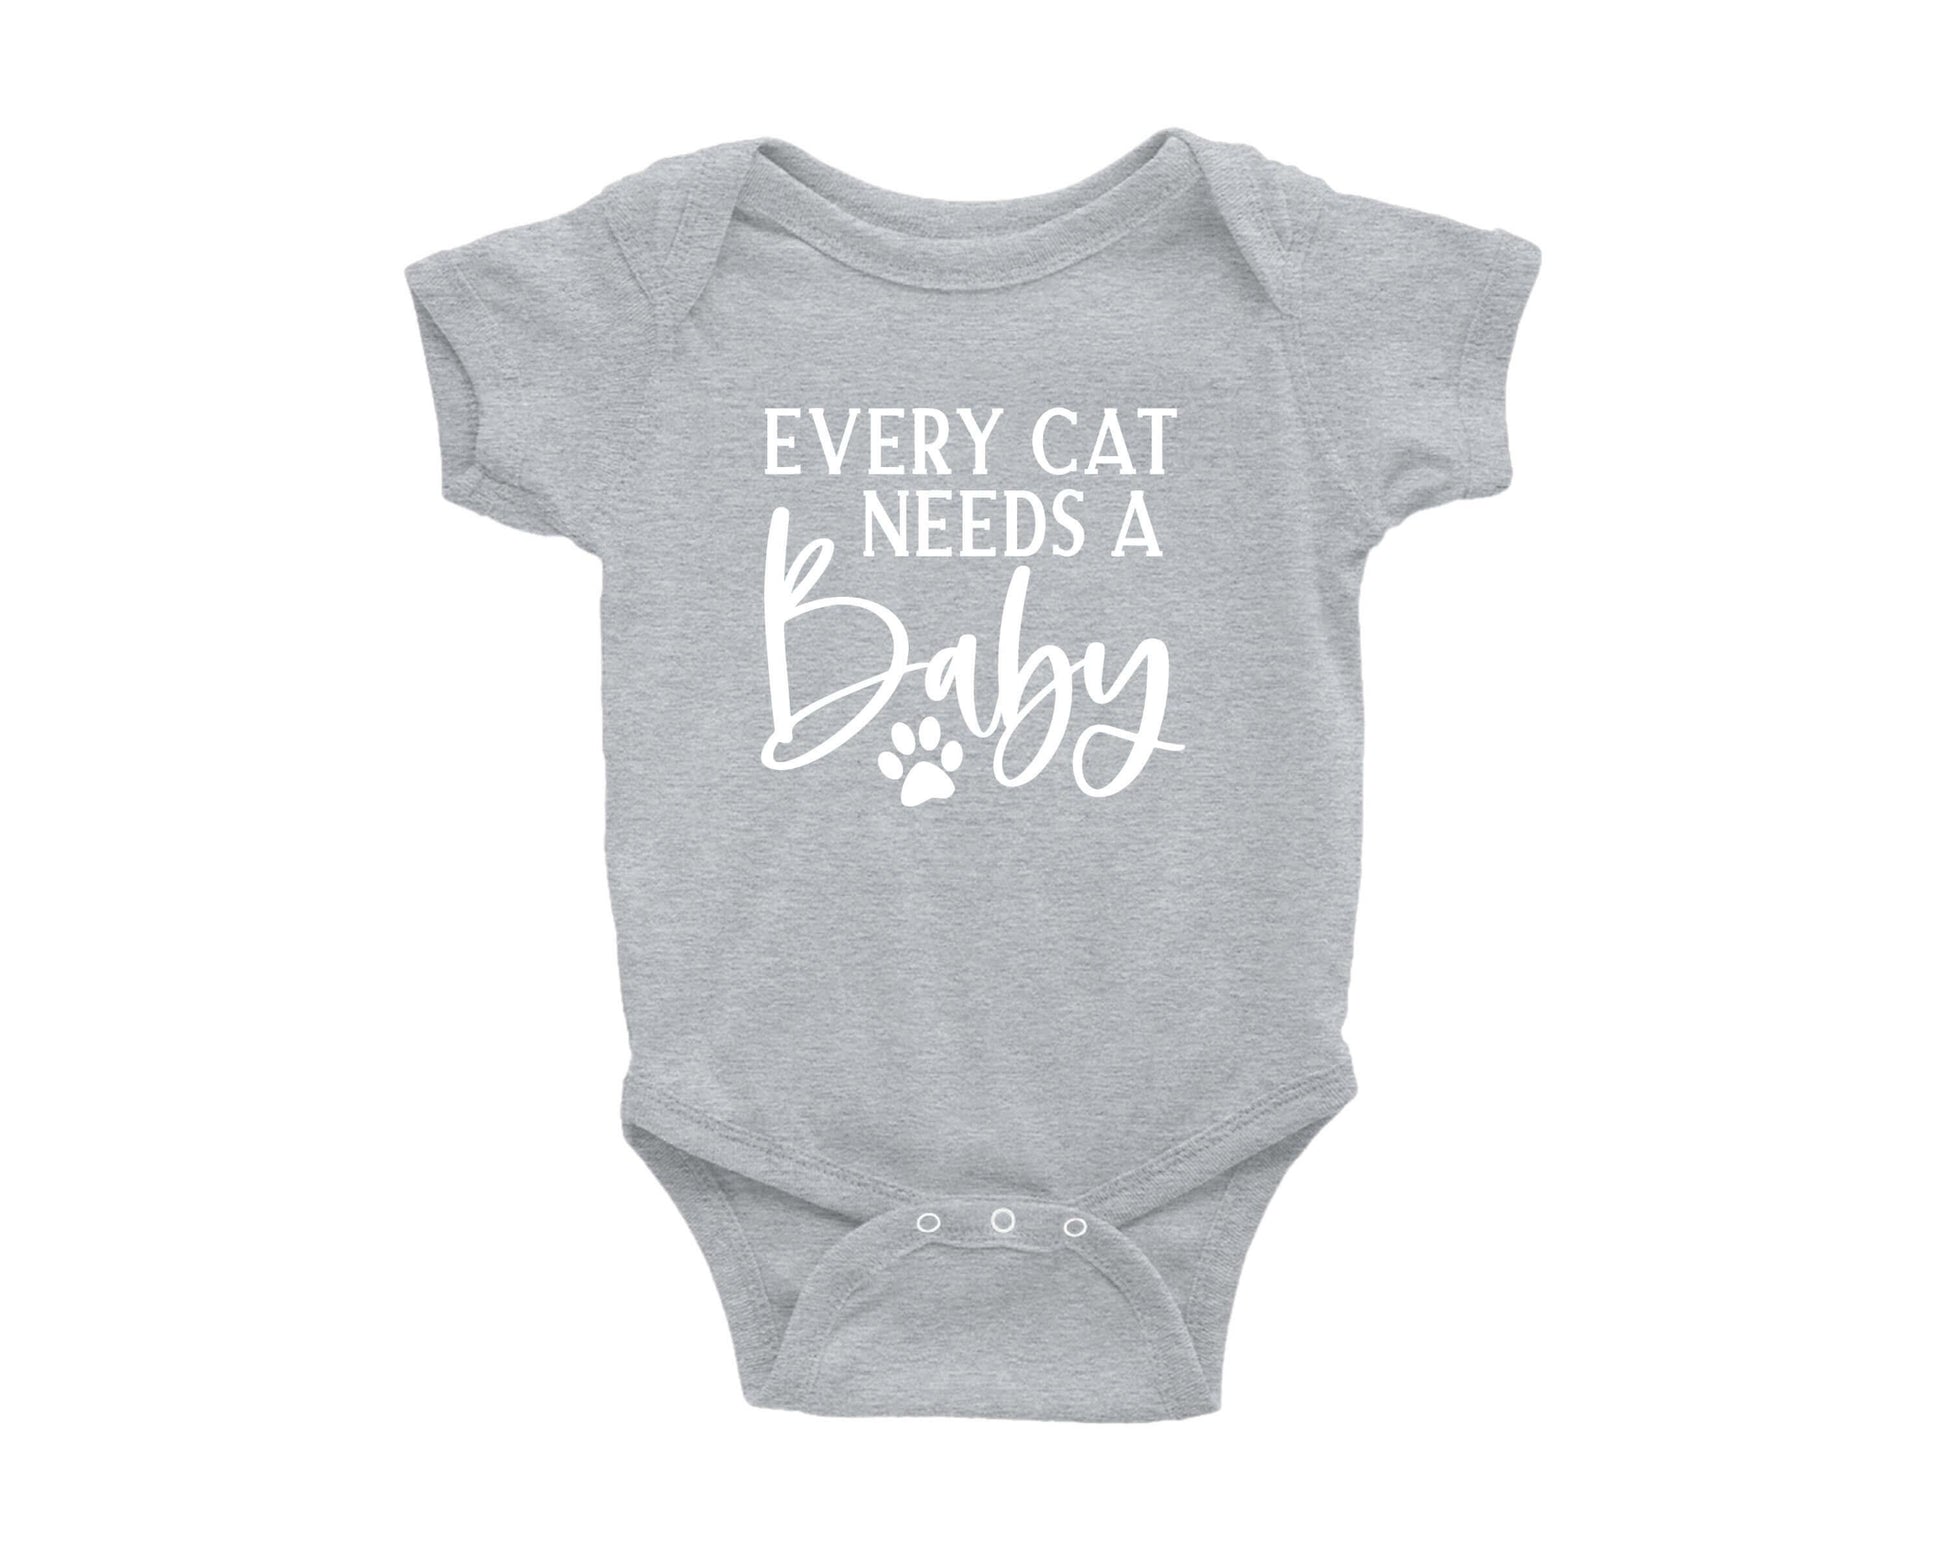 Every Cat Needs a Baby Baby Onesie - Crystal Rose Design Co.